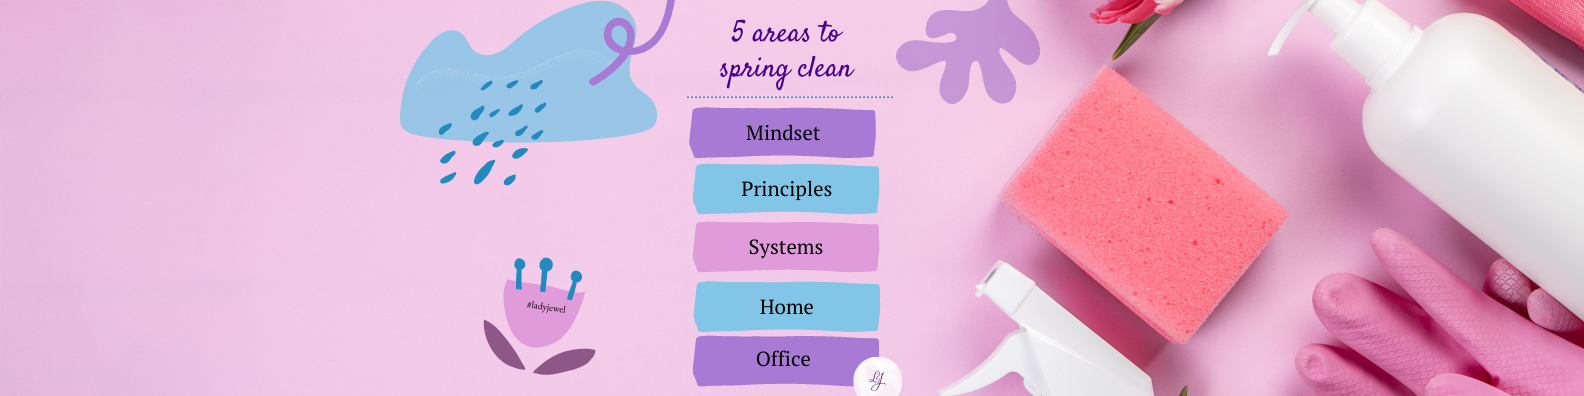 Spring Cleaning ~ 5 Areas to Spring Clean